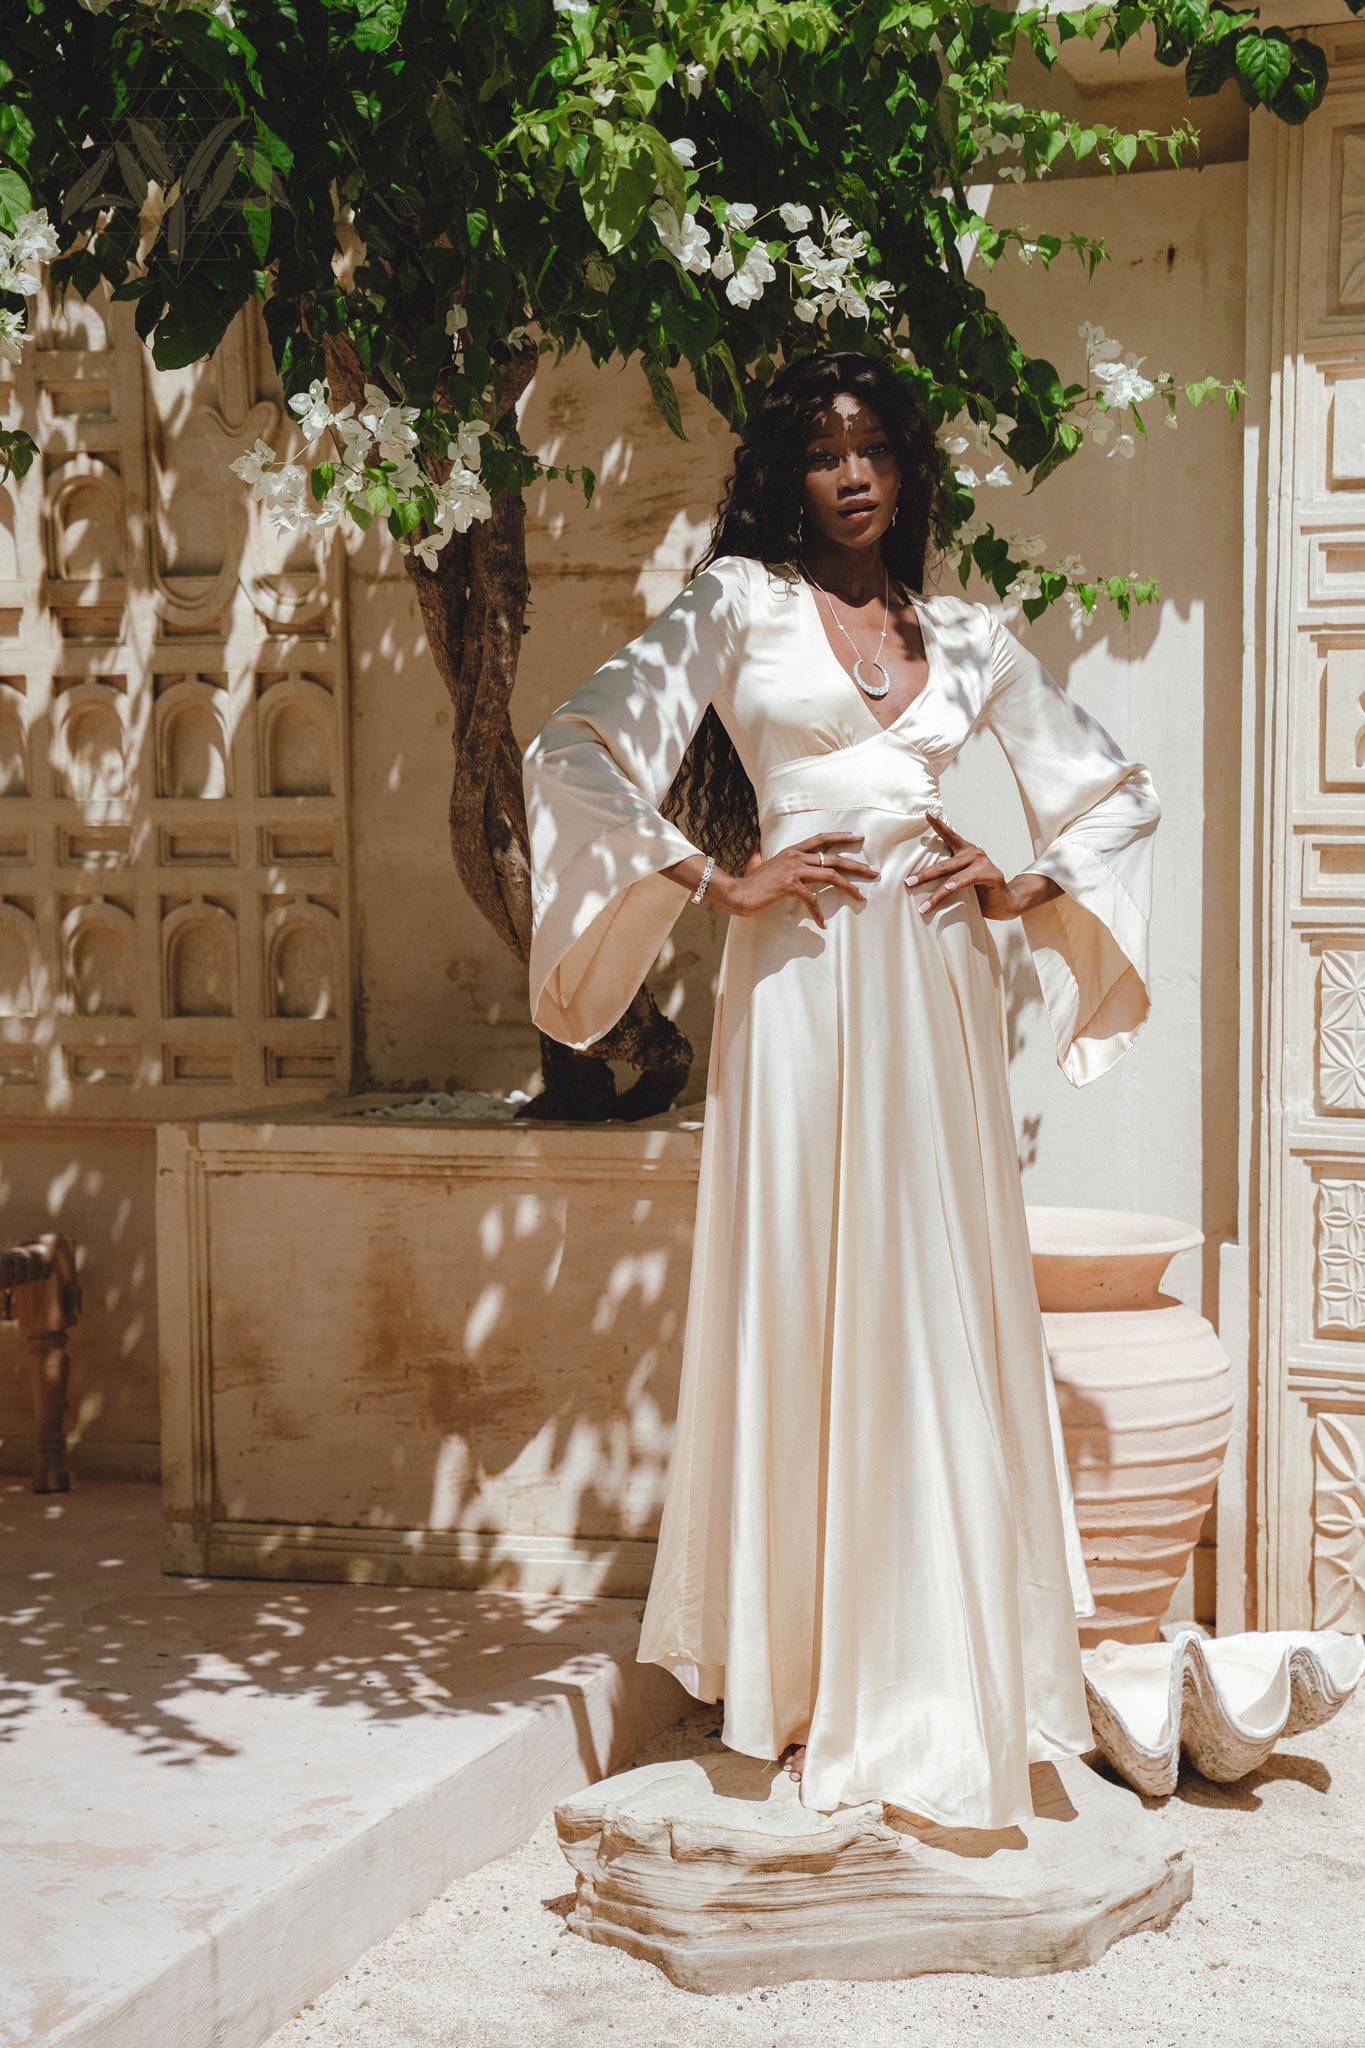 Capture attention in this fairy tale-inspired off-white silk dress, accentuated by bell sleeves and an open back design, perfect for a boho-chic bride.